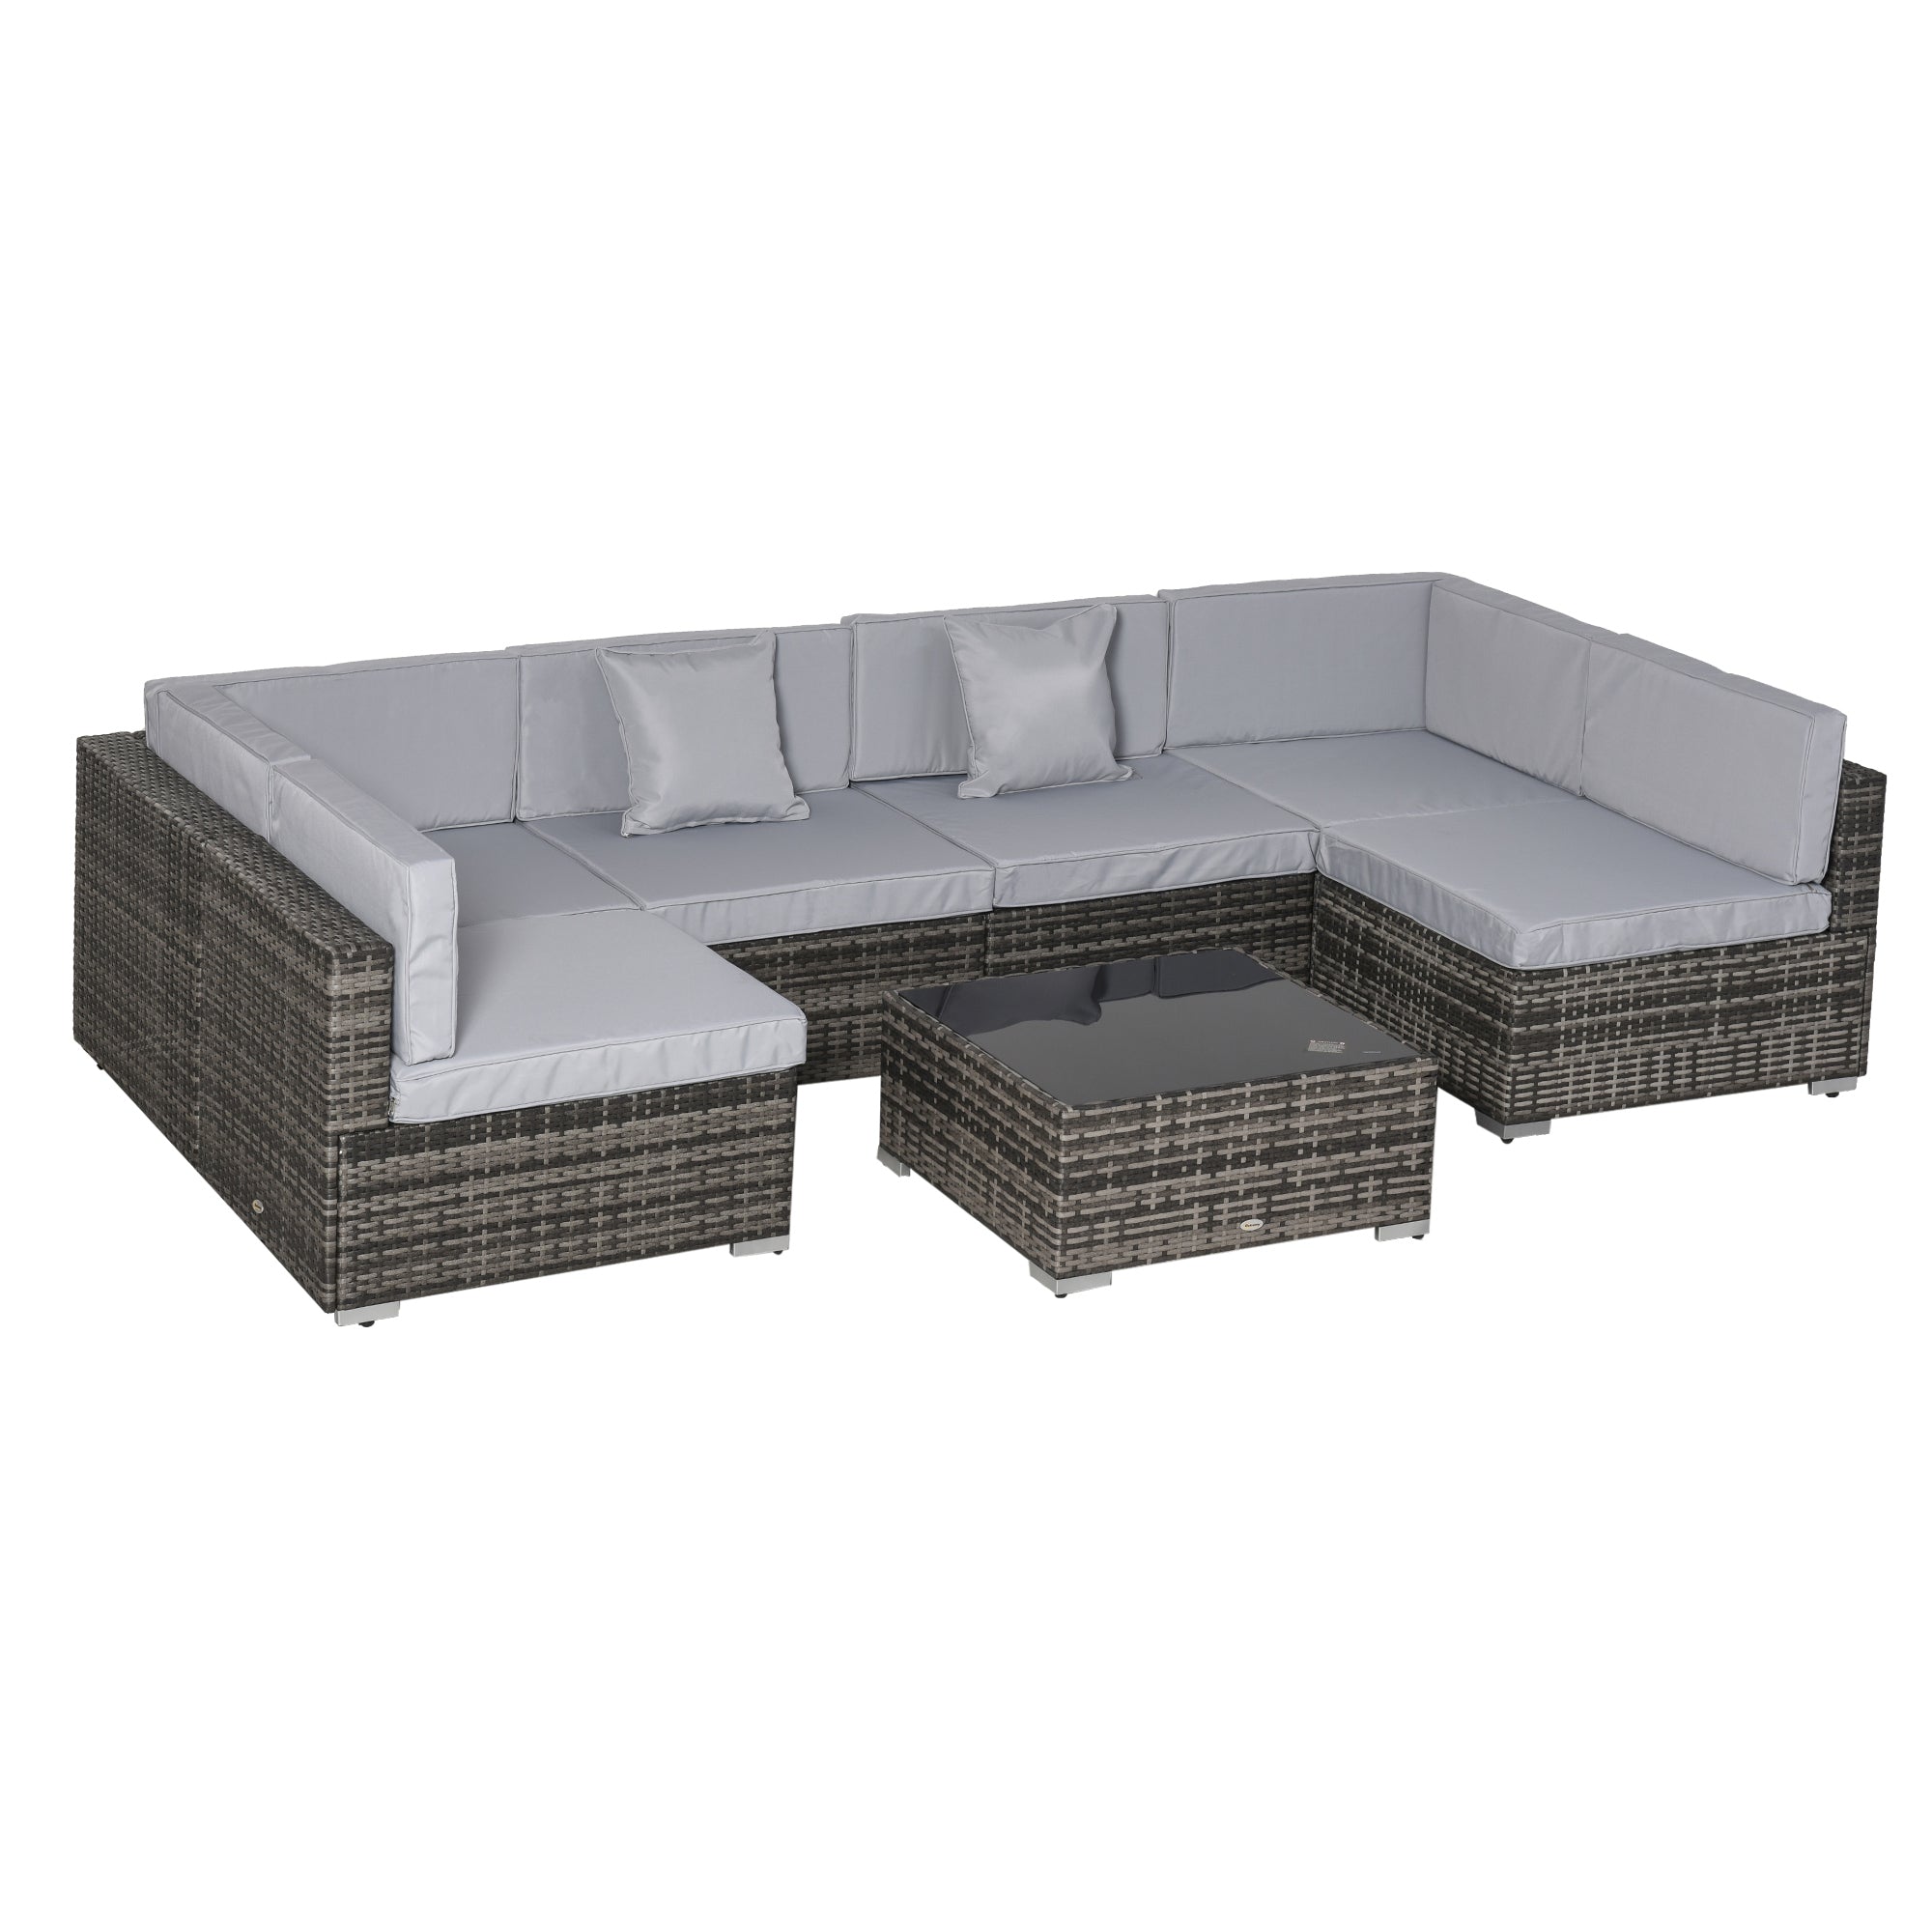 Outsunny 7PC Rattan Furniture Sectional Sofa Set Coffee Table Buckle Structure  | TJ Hughes